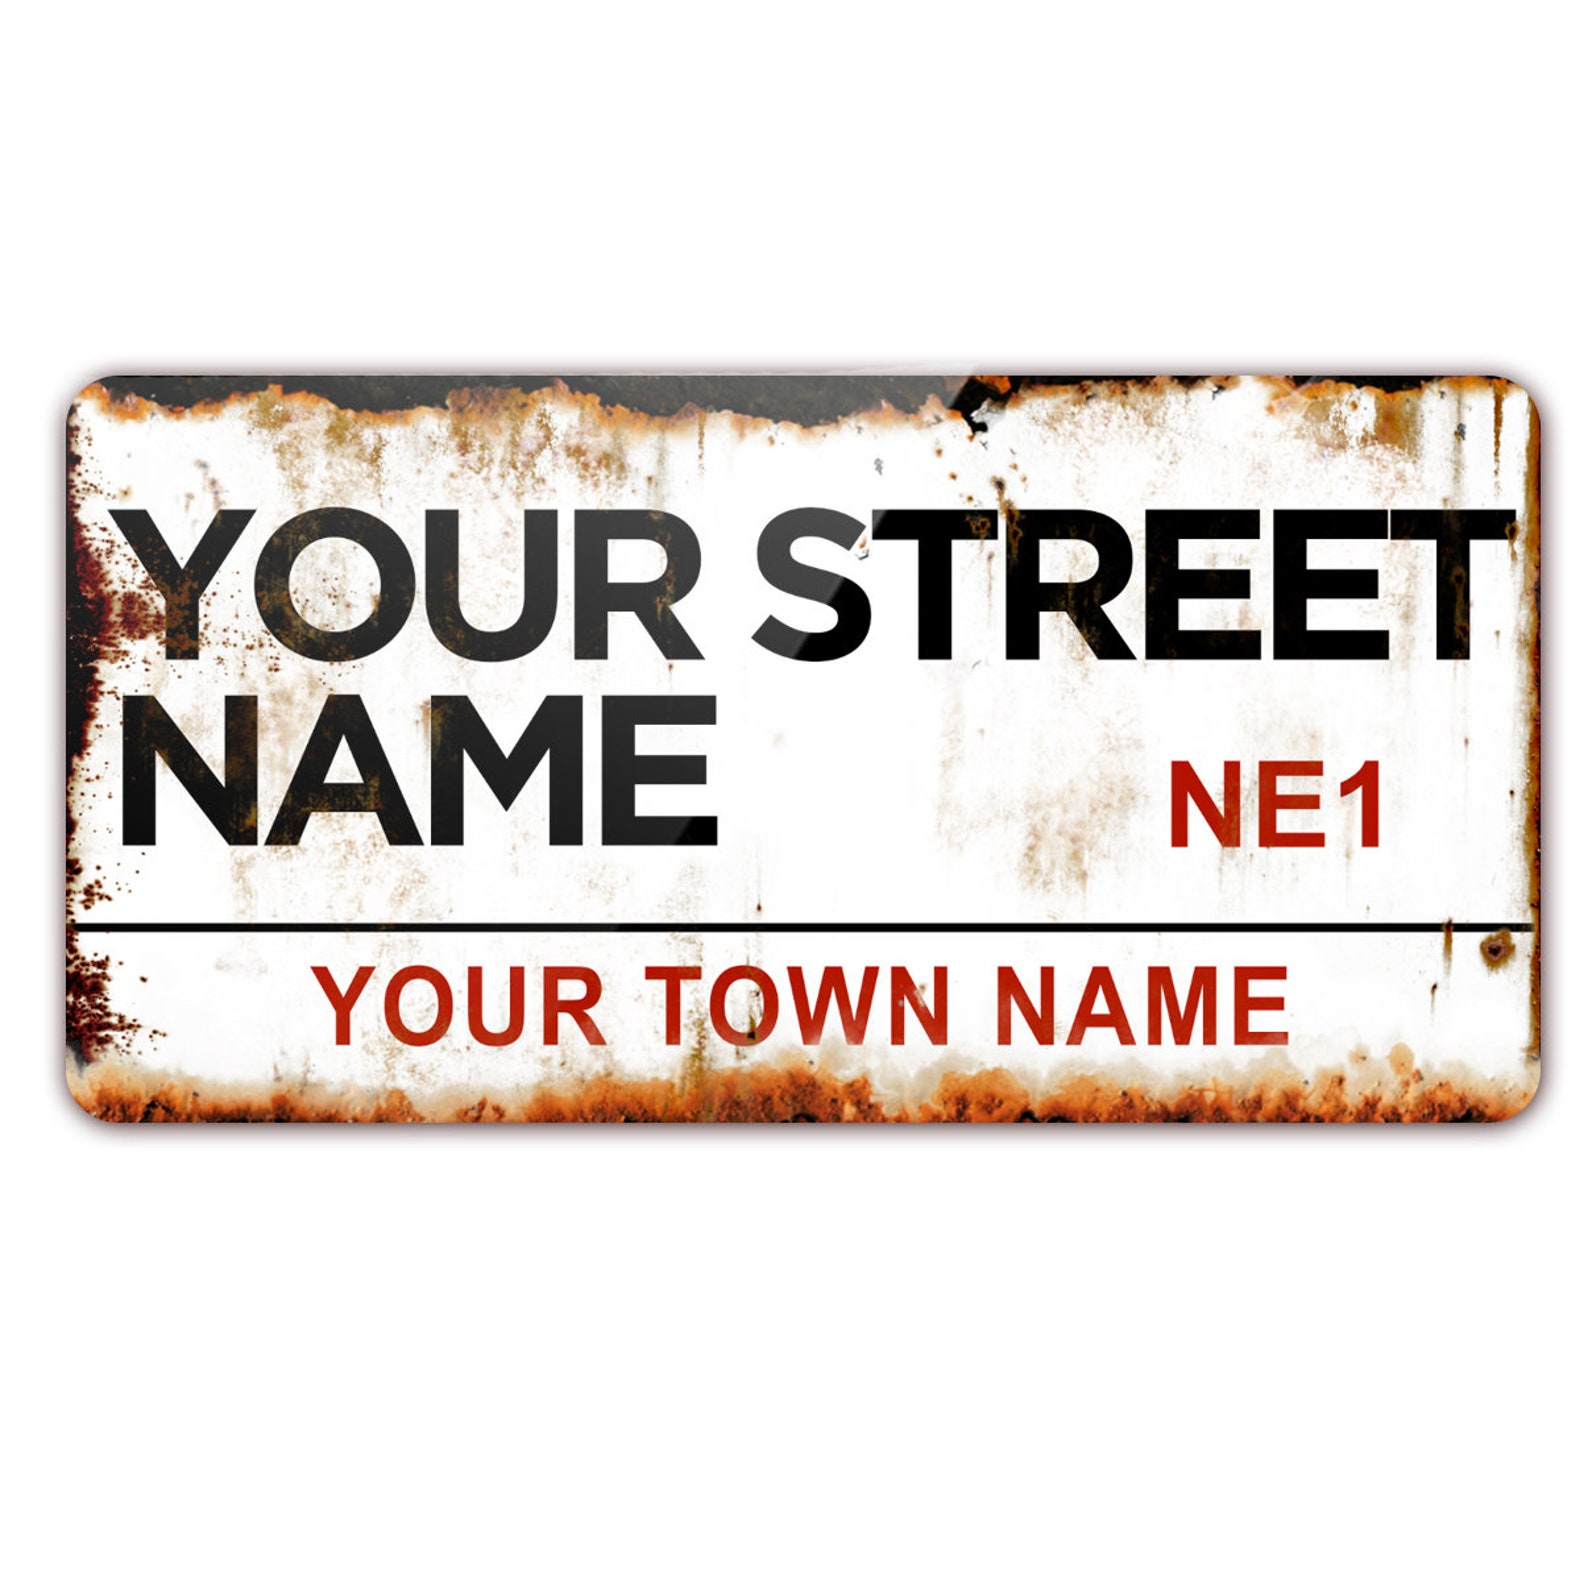 Create Your Own Retro Road Sign Vintage Street Sign Garage Etsy